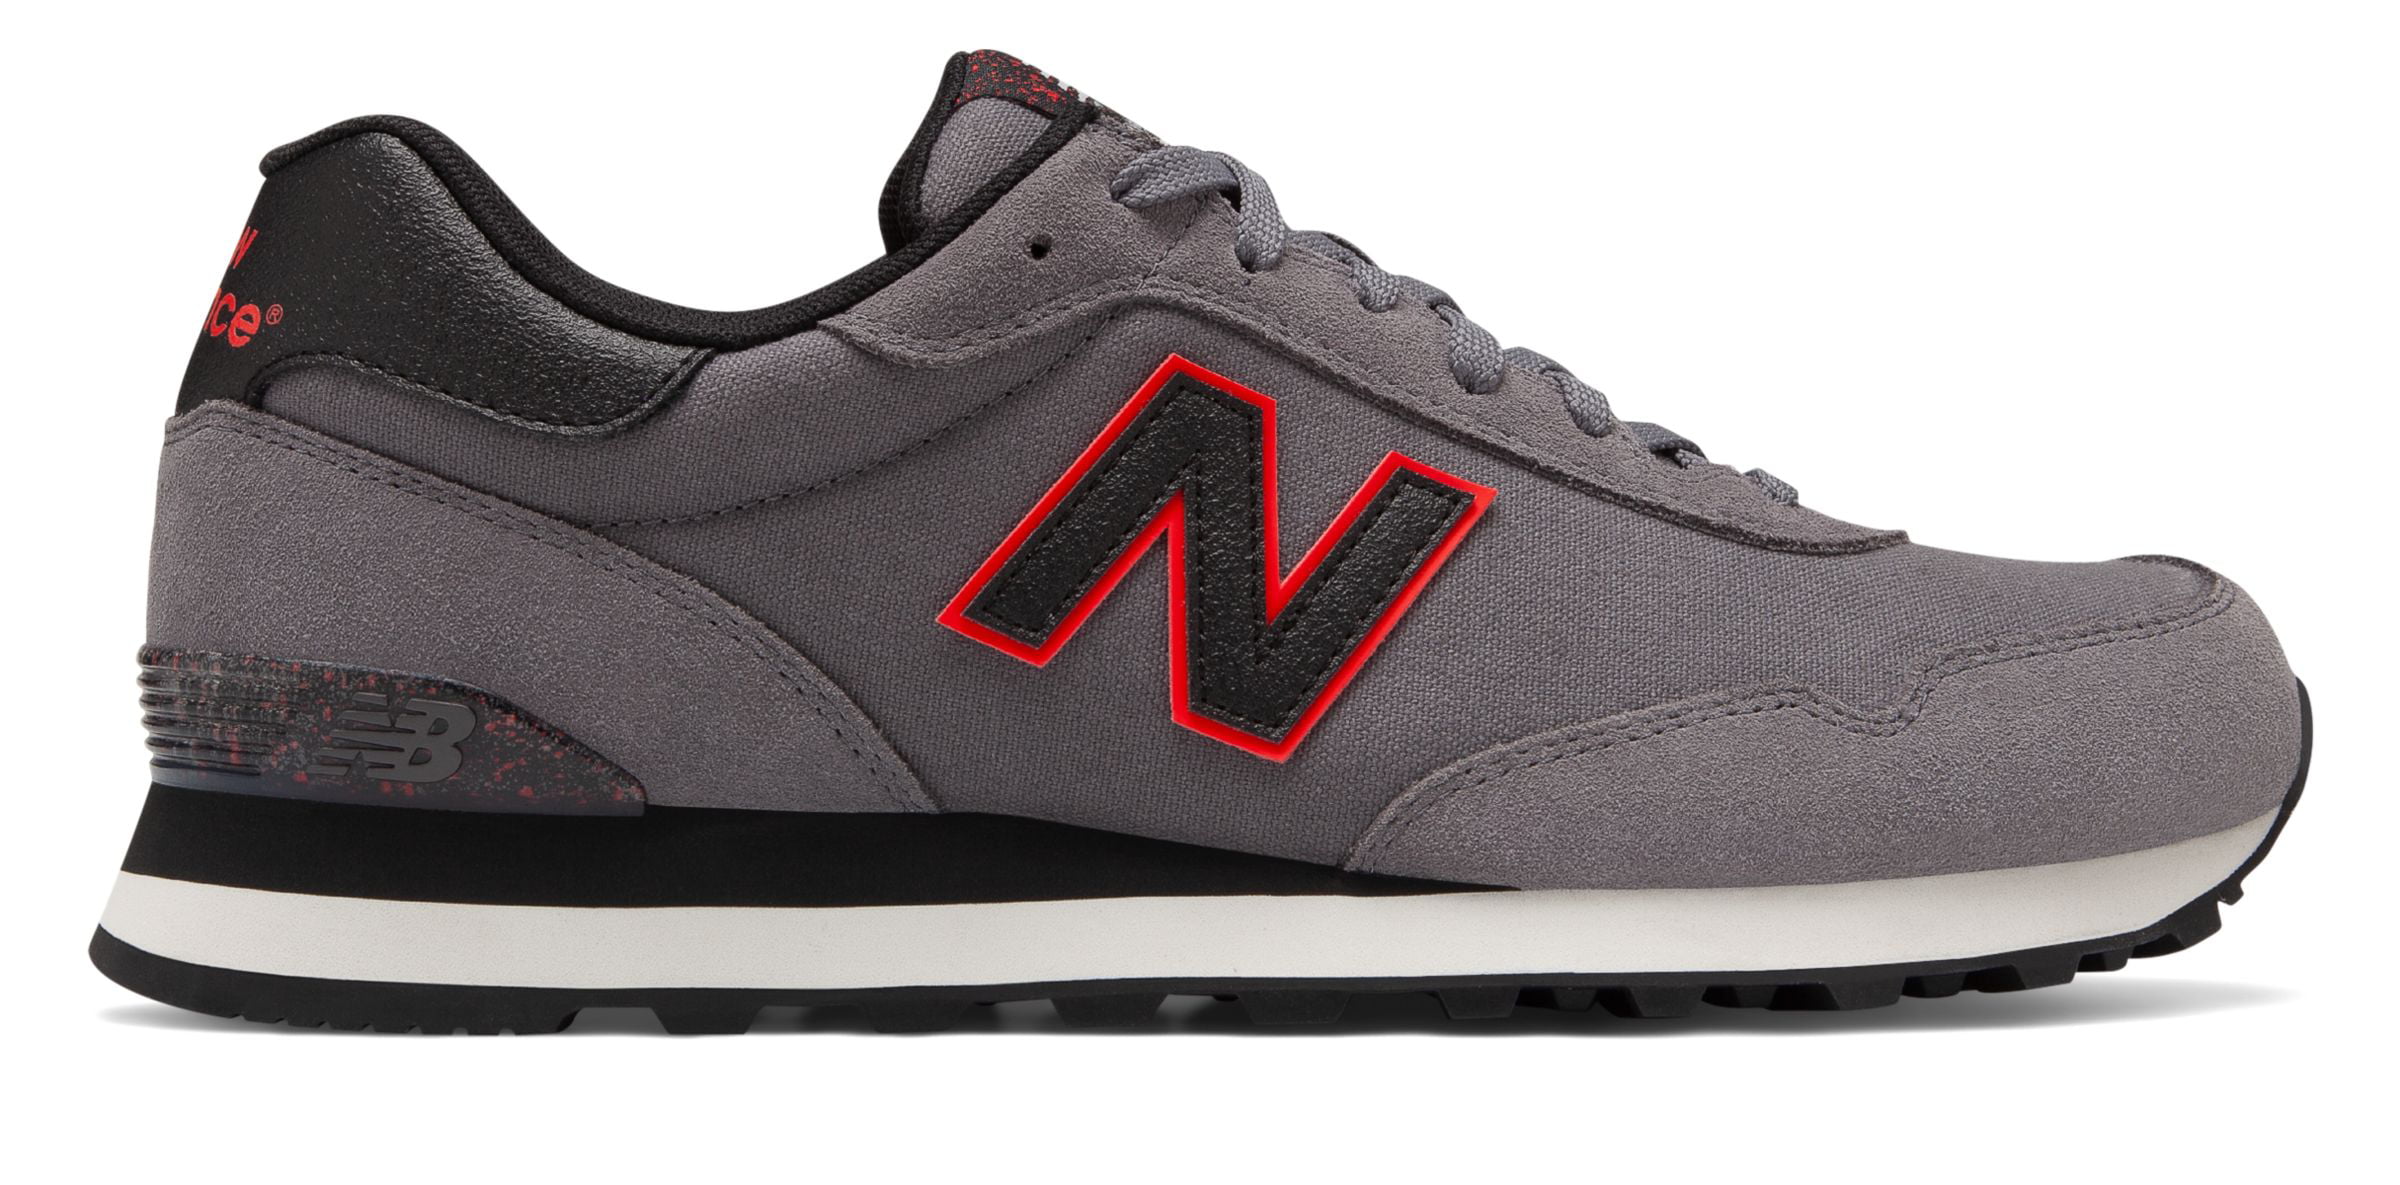 New Balance - New Balance Men's 515 Shoes Grey with Black & Red ...